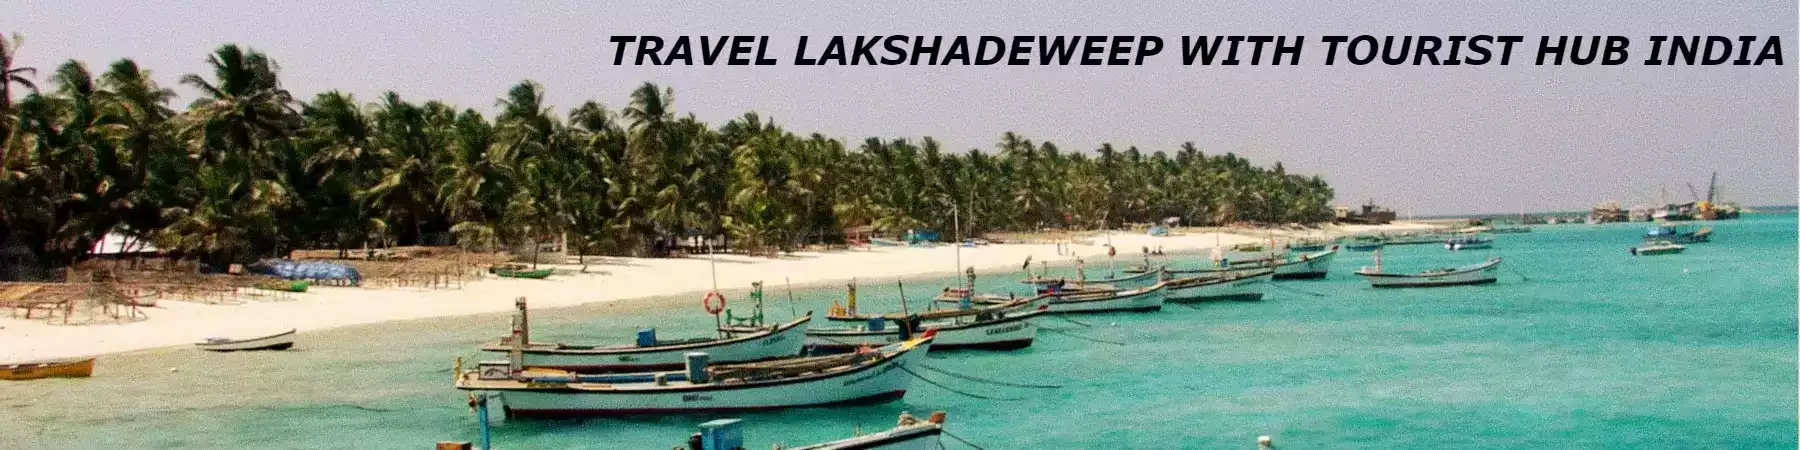 Lakshadweep holiday packages from Kolkata with Tourist Hub India - The Best Lakshadweep Travel Agency